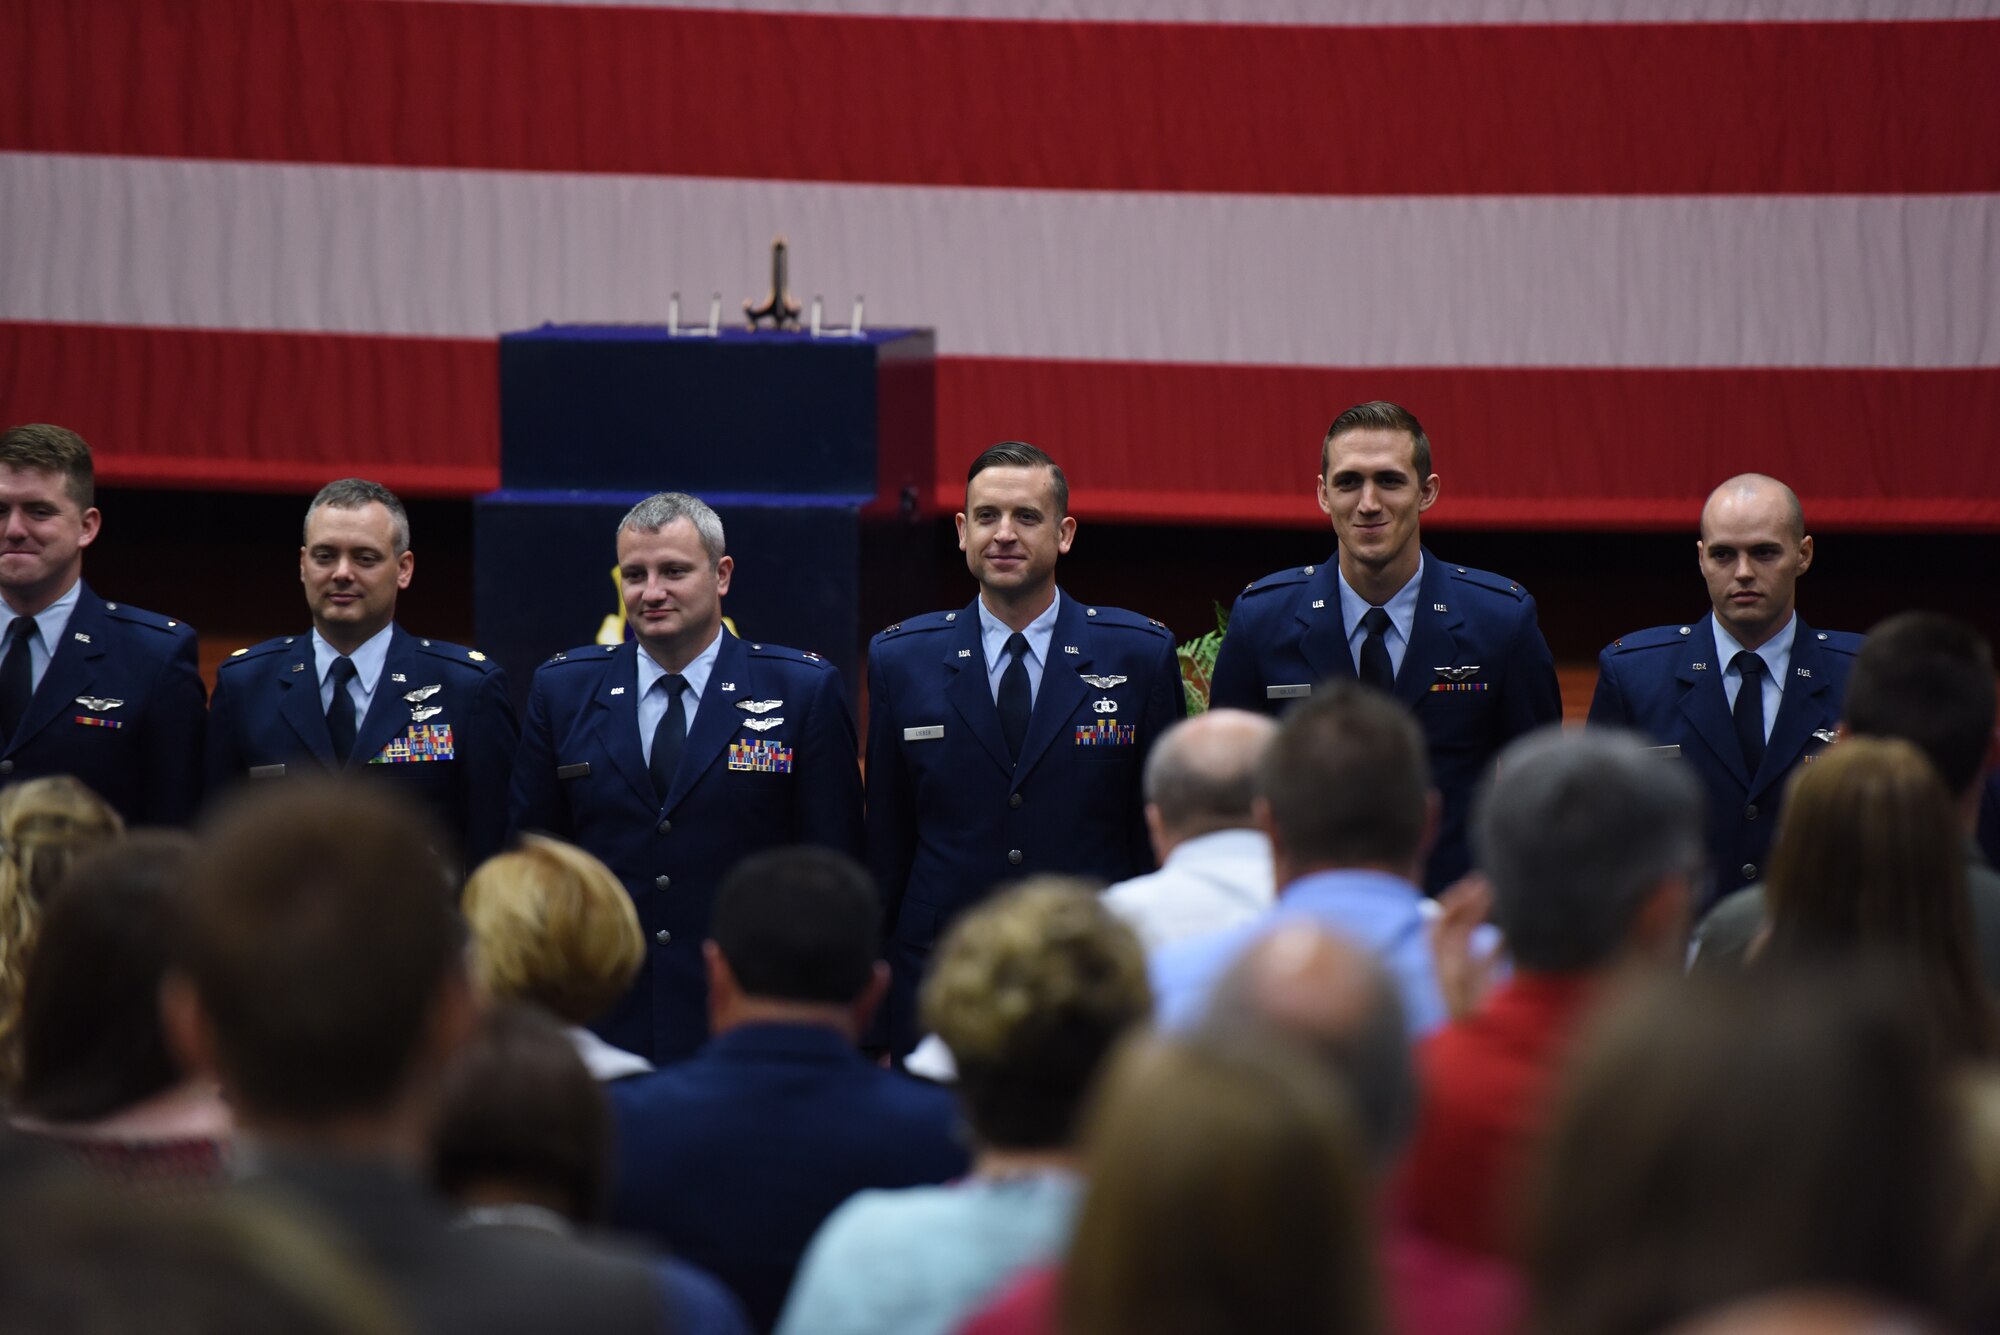 Students from Specialized Undergraduate Pilot Training Classes 18-14/15 are recognized after receiving their wings Sept. 7, 2018, on Columbus Air Force Base, Mississippi. The graduation consisted of all students from SUPT Class 18-14 and the T-38C Talon students from SUPT Class 18-15. (U.S. Air Force photo by Airman 1st Class Beaux Hebert)